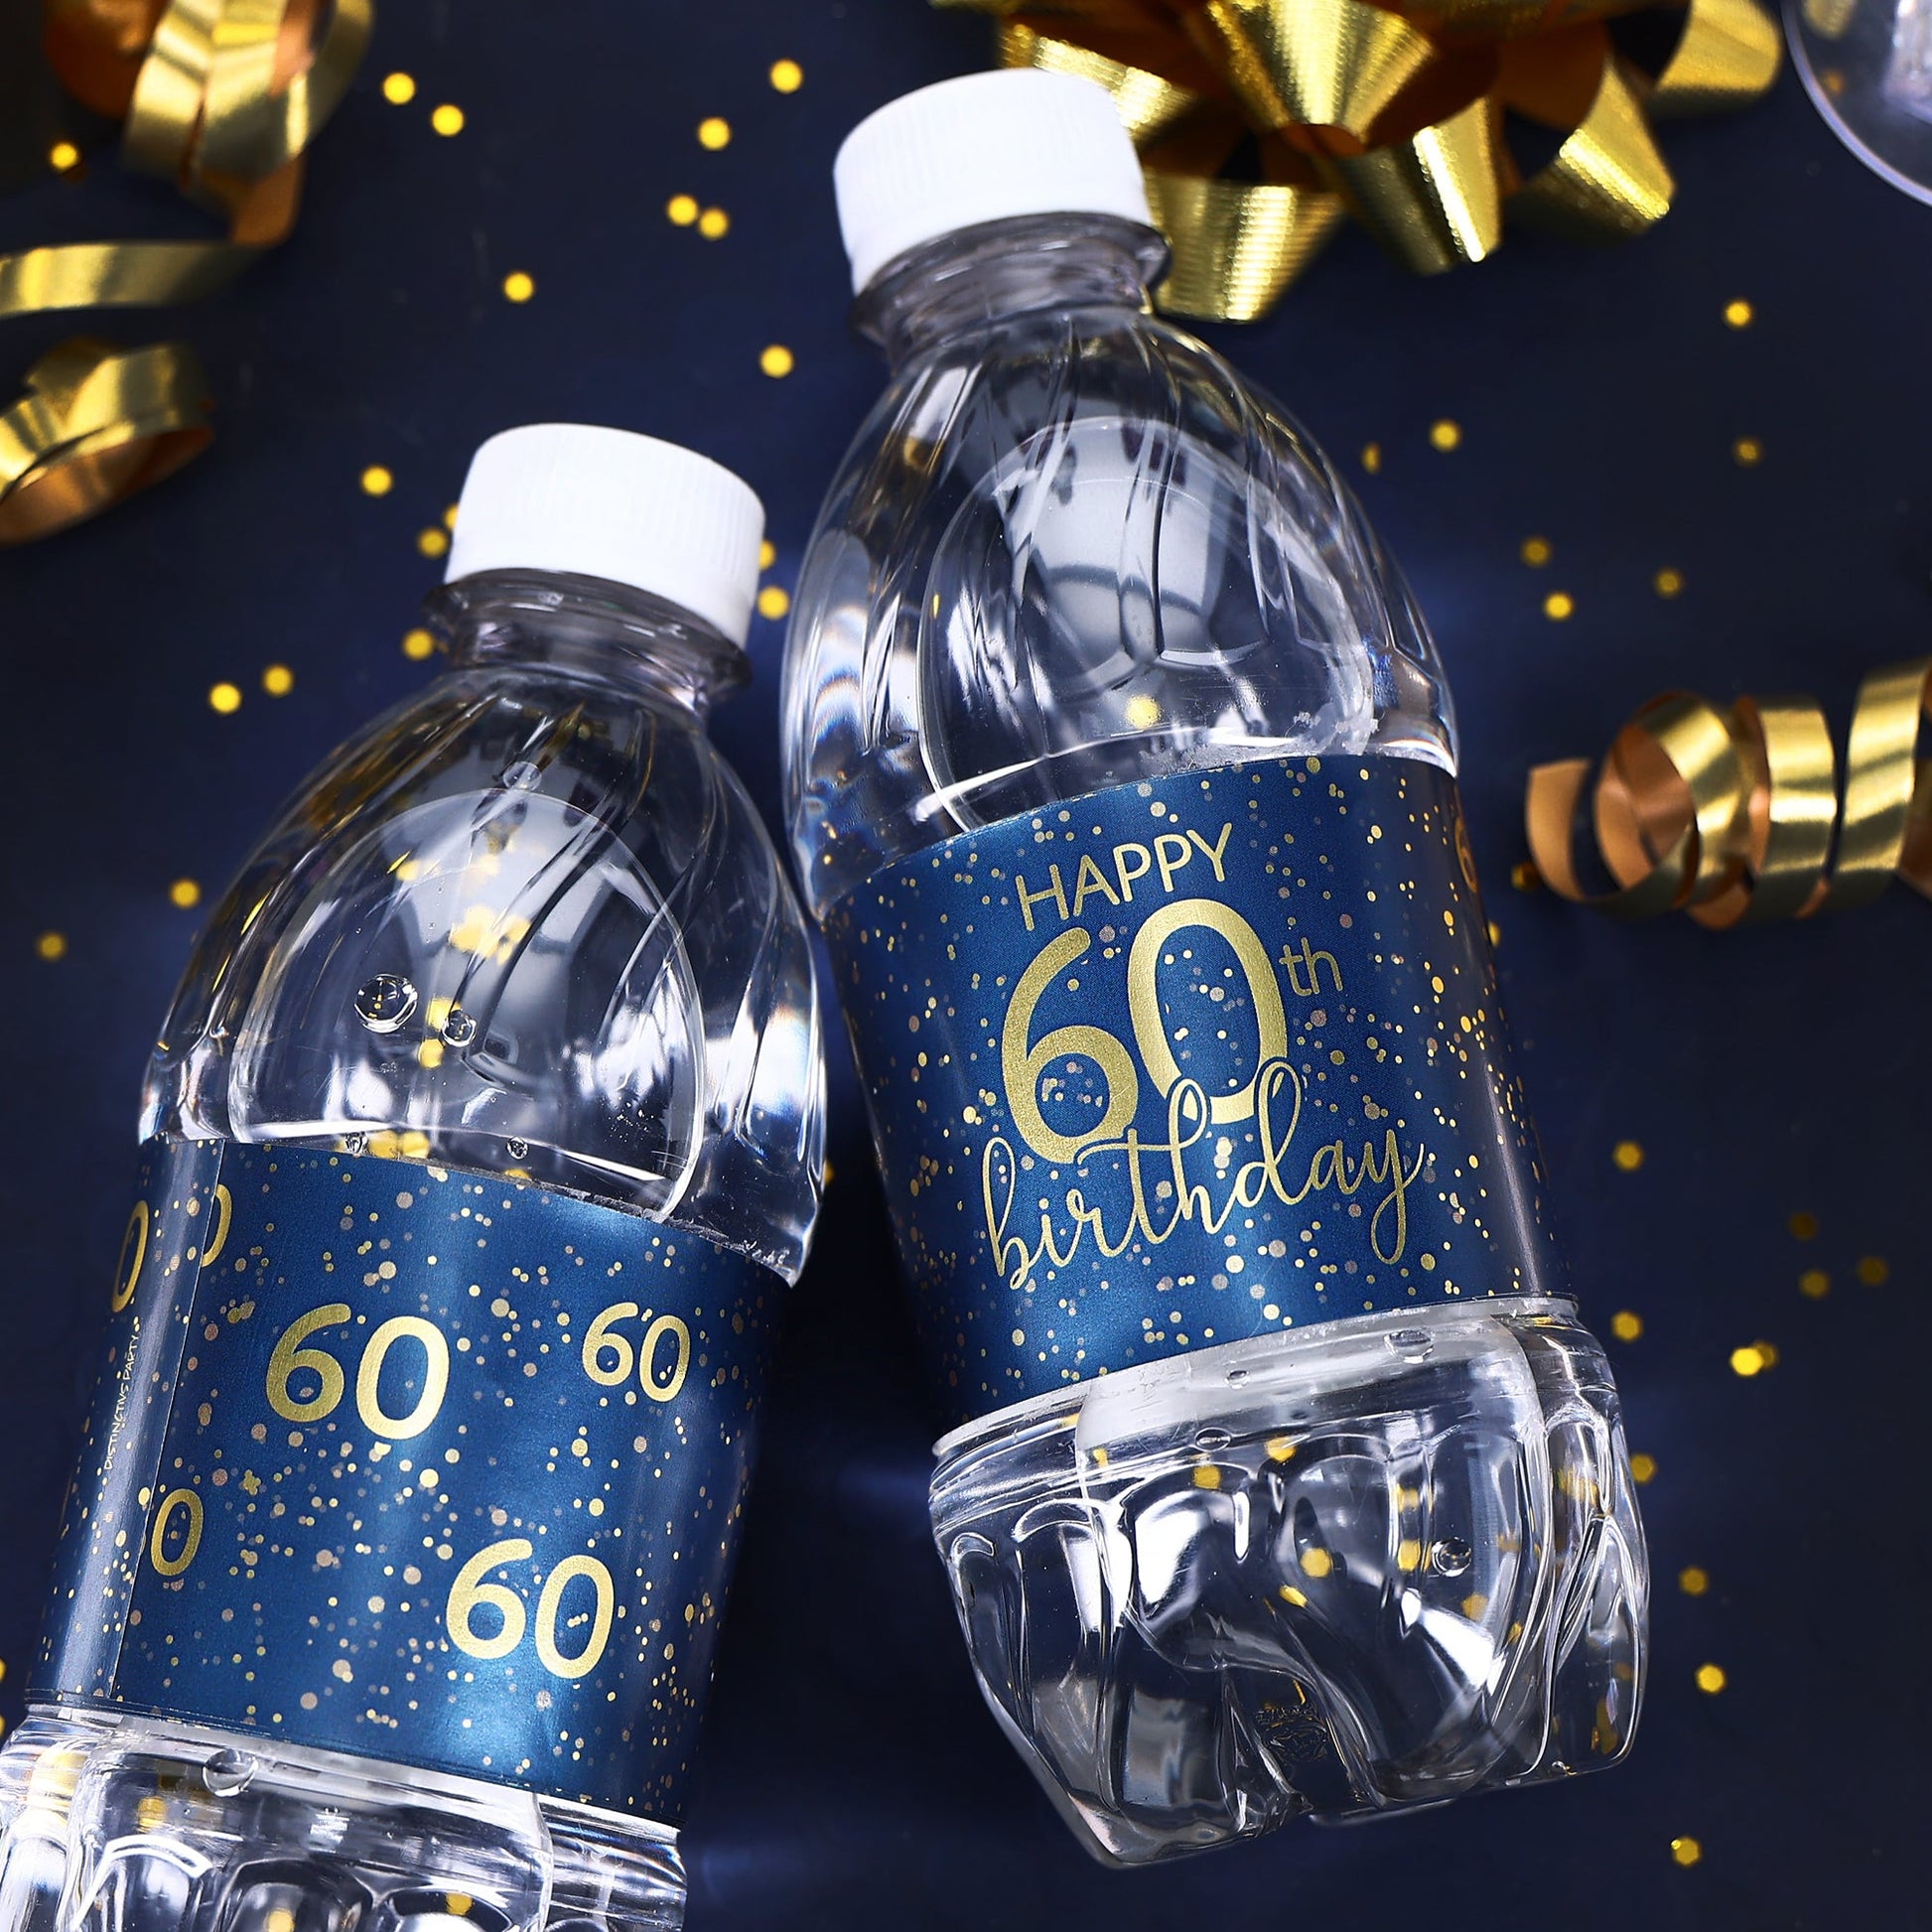 A group of water bottles with elegant navy blue and gold labels that are customized for an 60th birthday celebration, perfect for adding a personalized touch to any party